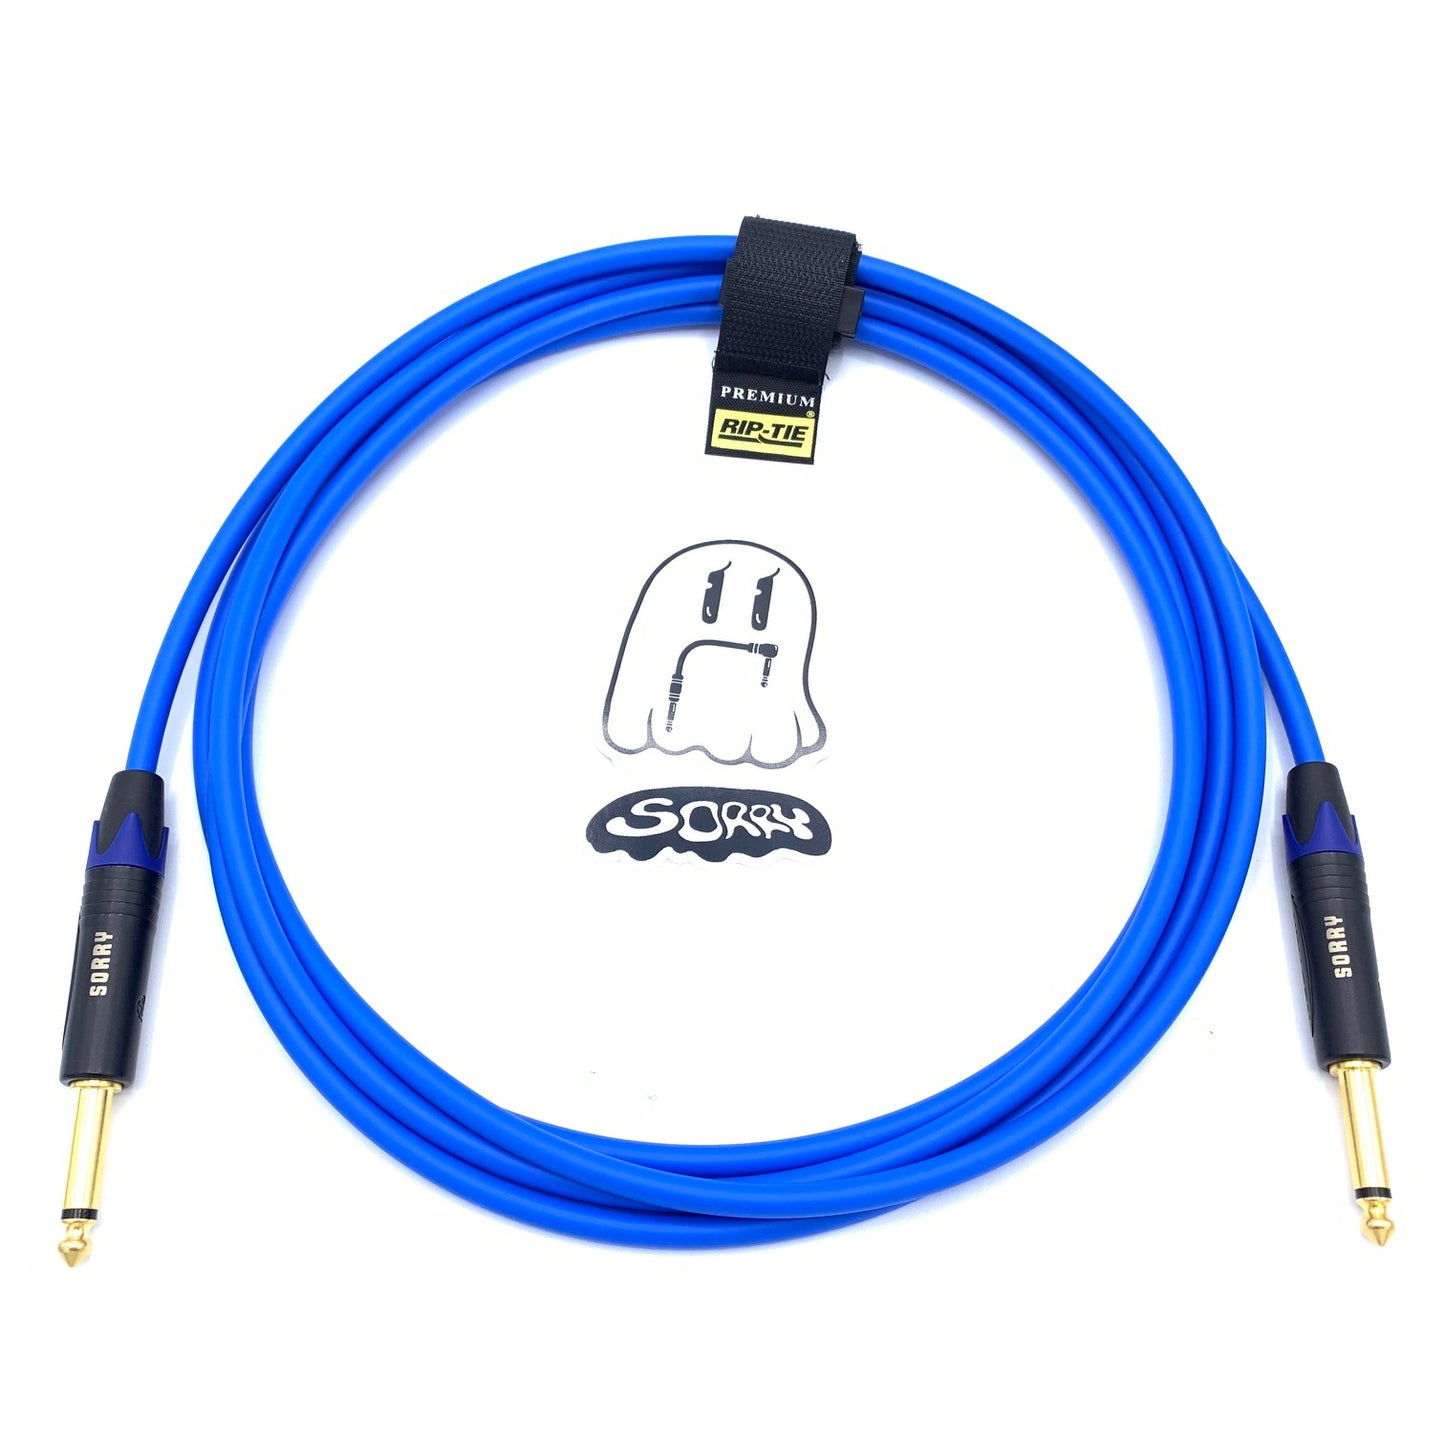 SORRY Straight to Straight Guitar / Instrument Cable - Standard Blue